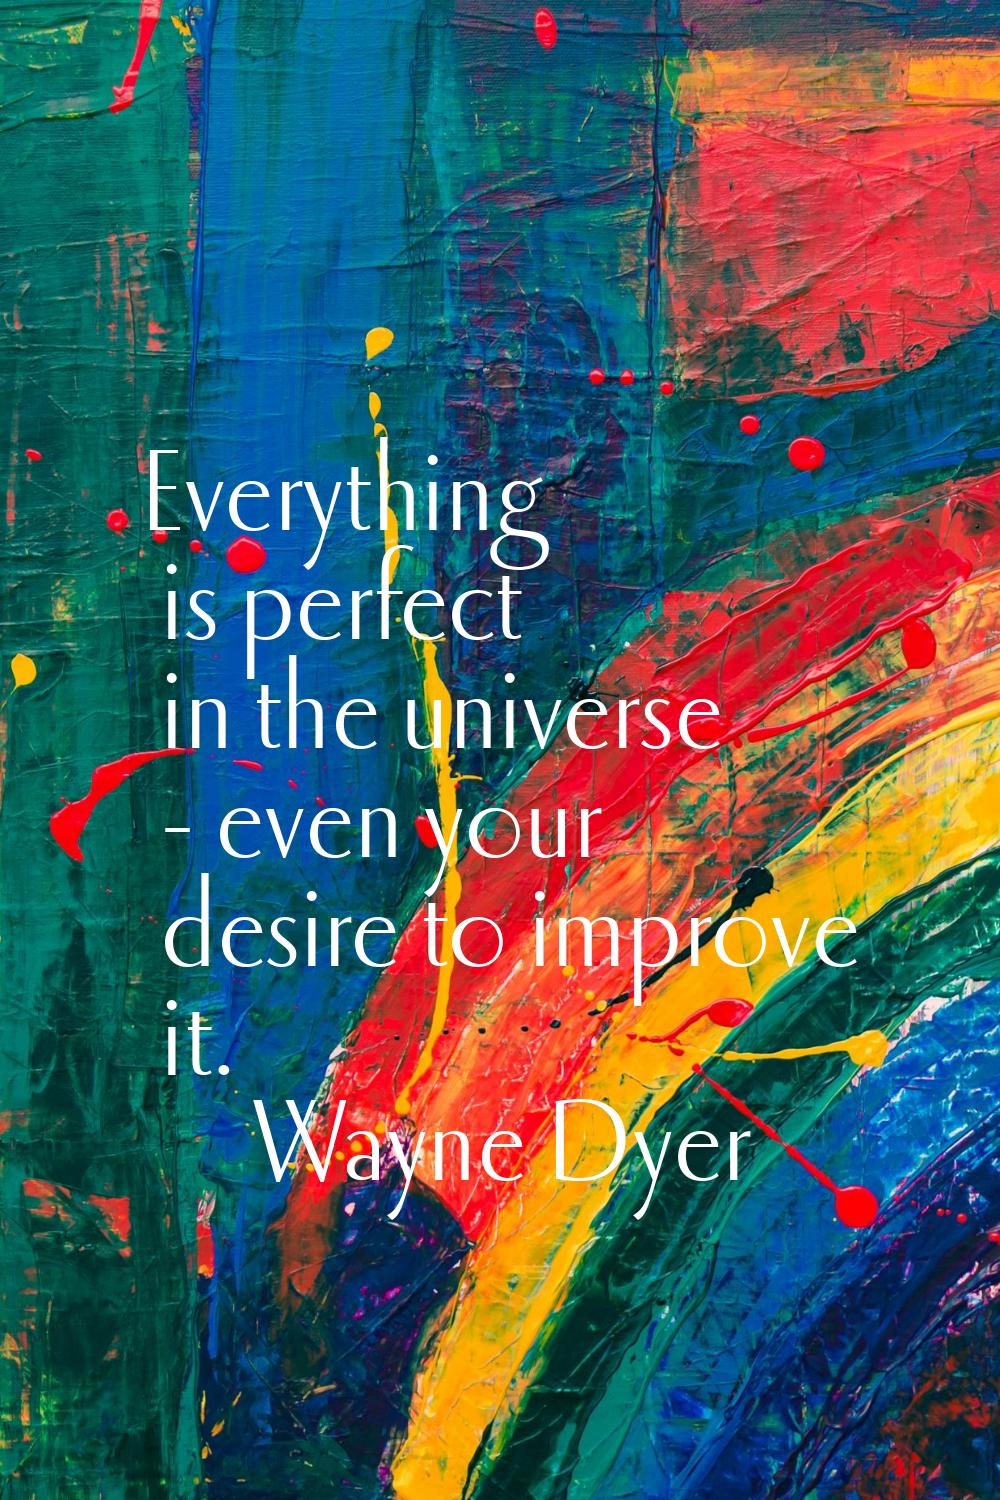 Everything is perfect in the universe - even your desire to improve it.